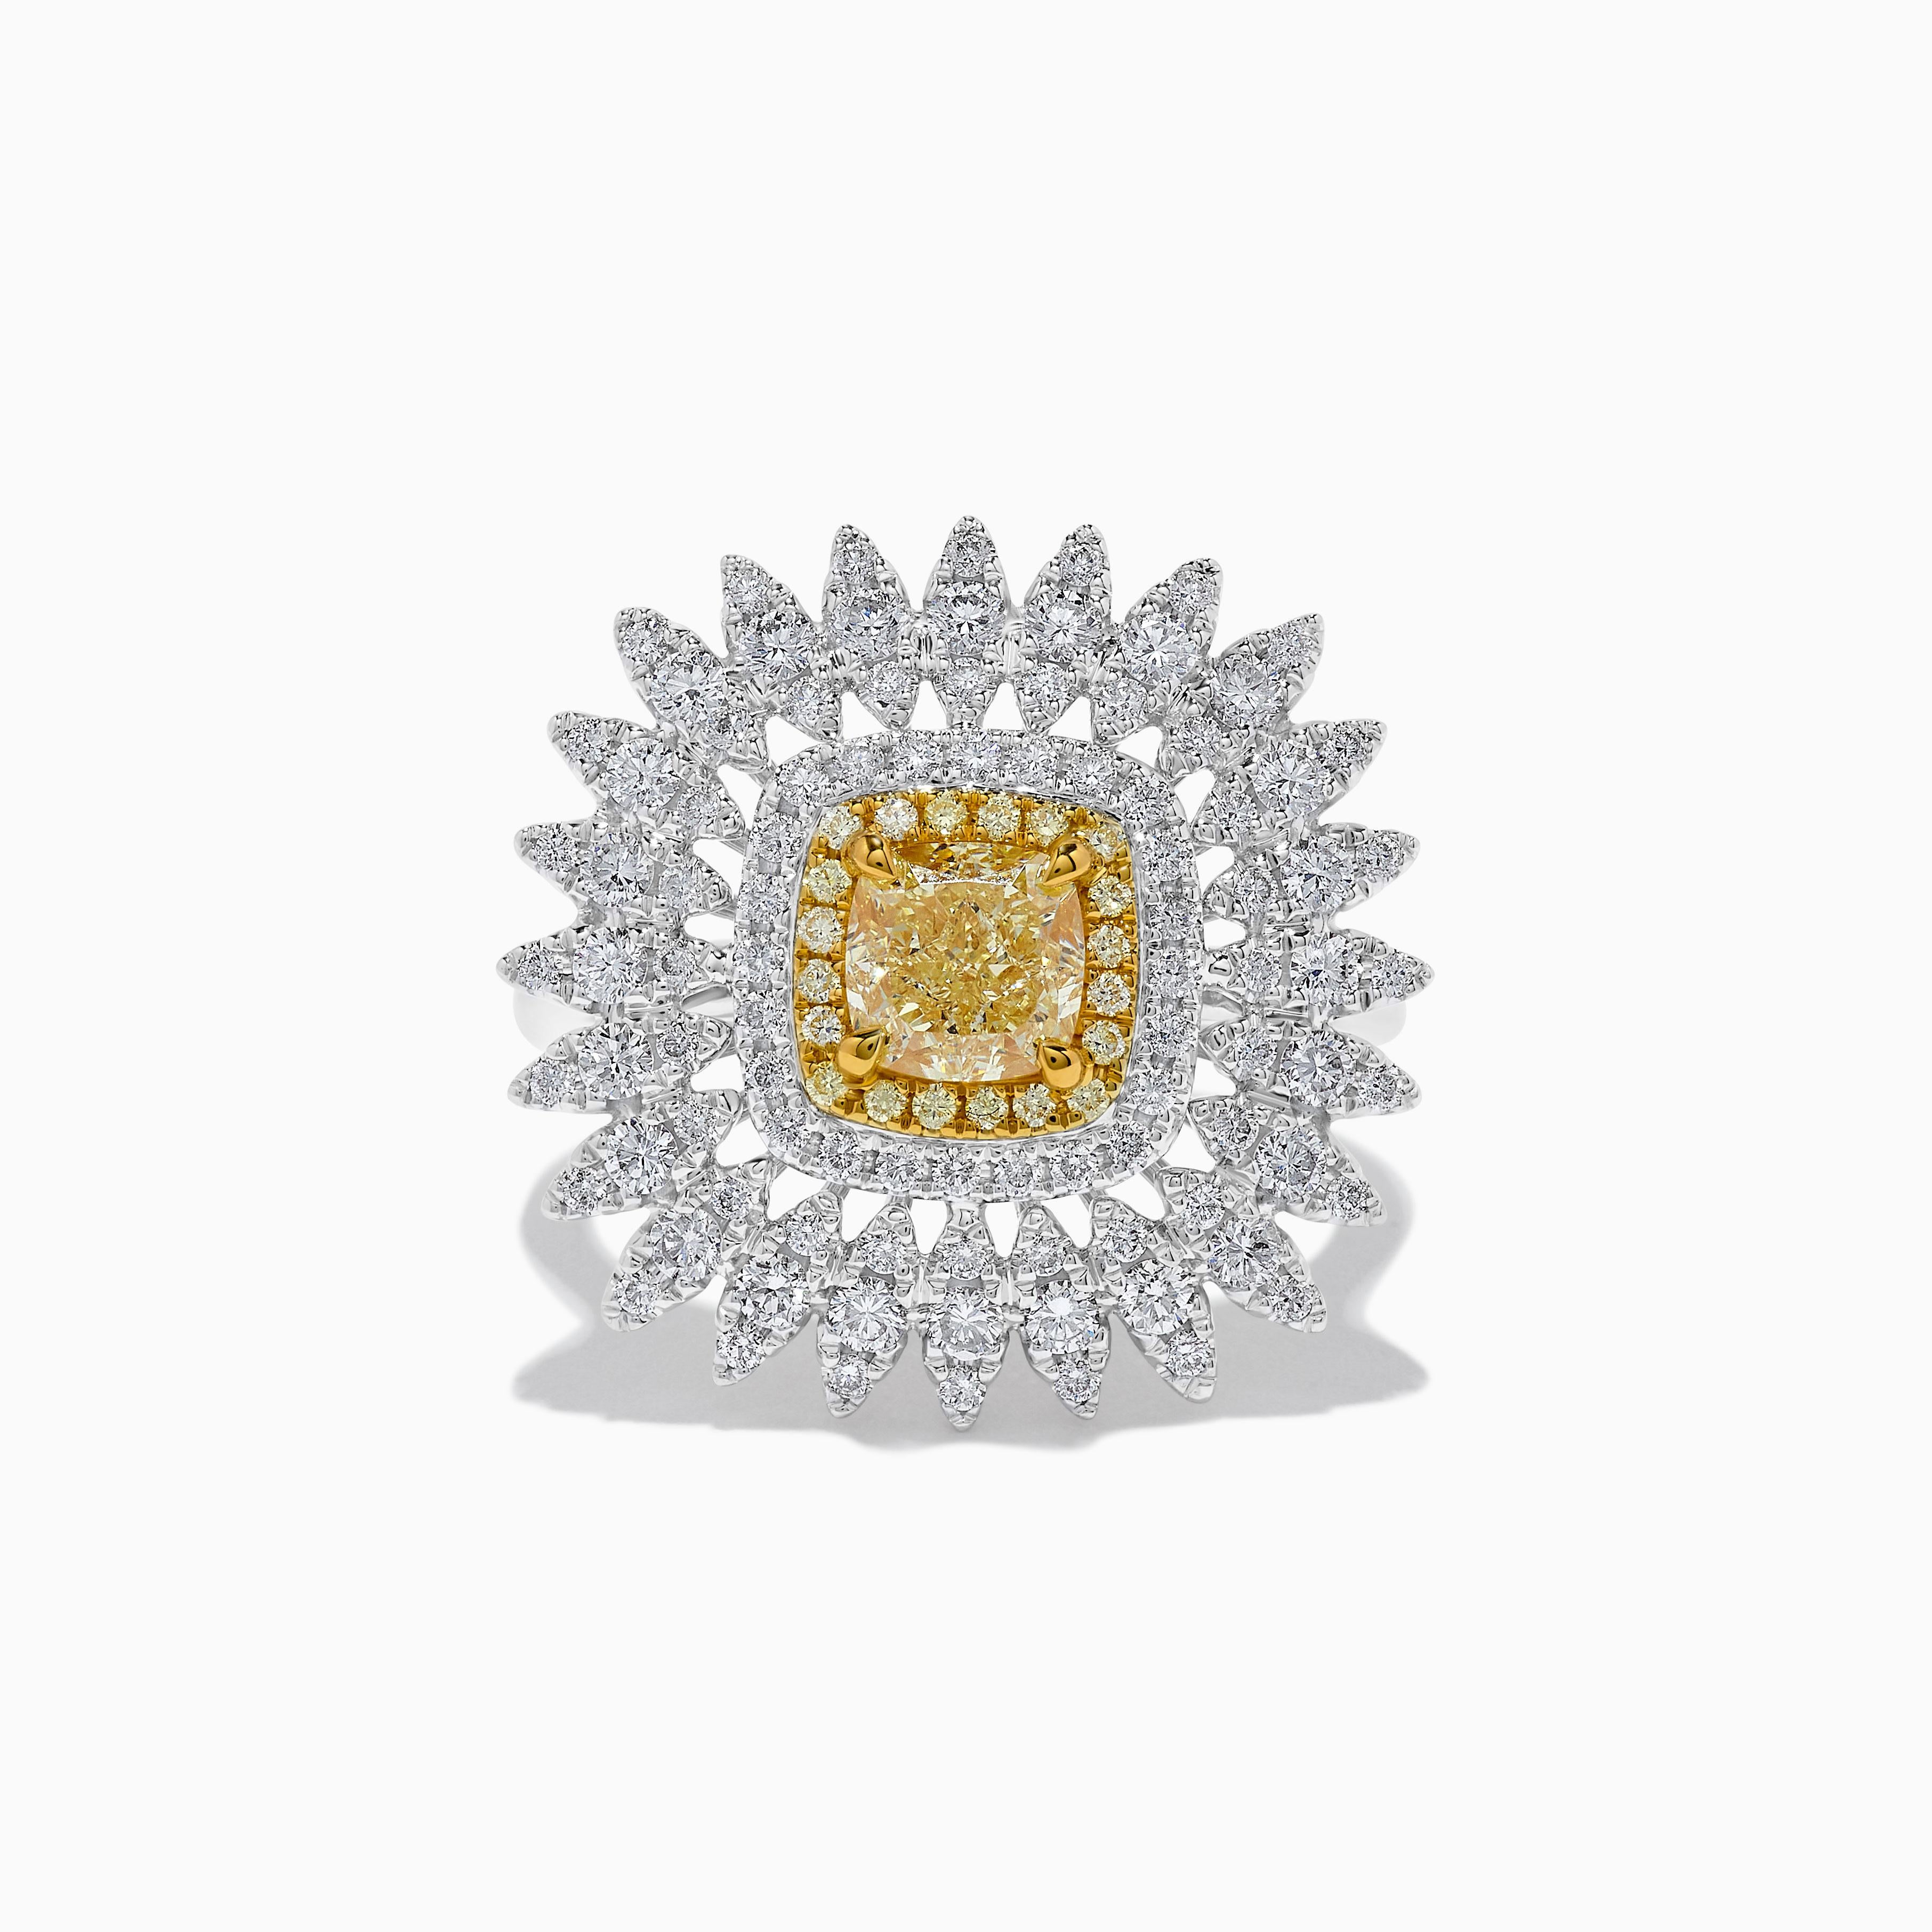 Cushion Cut GIA Certified Natural Yellow Cushion Diamond 1.98 Carat TW Gold Cocktail Ring For Sale